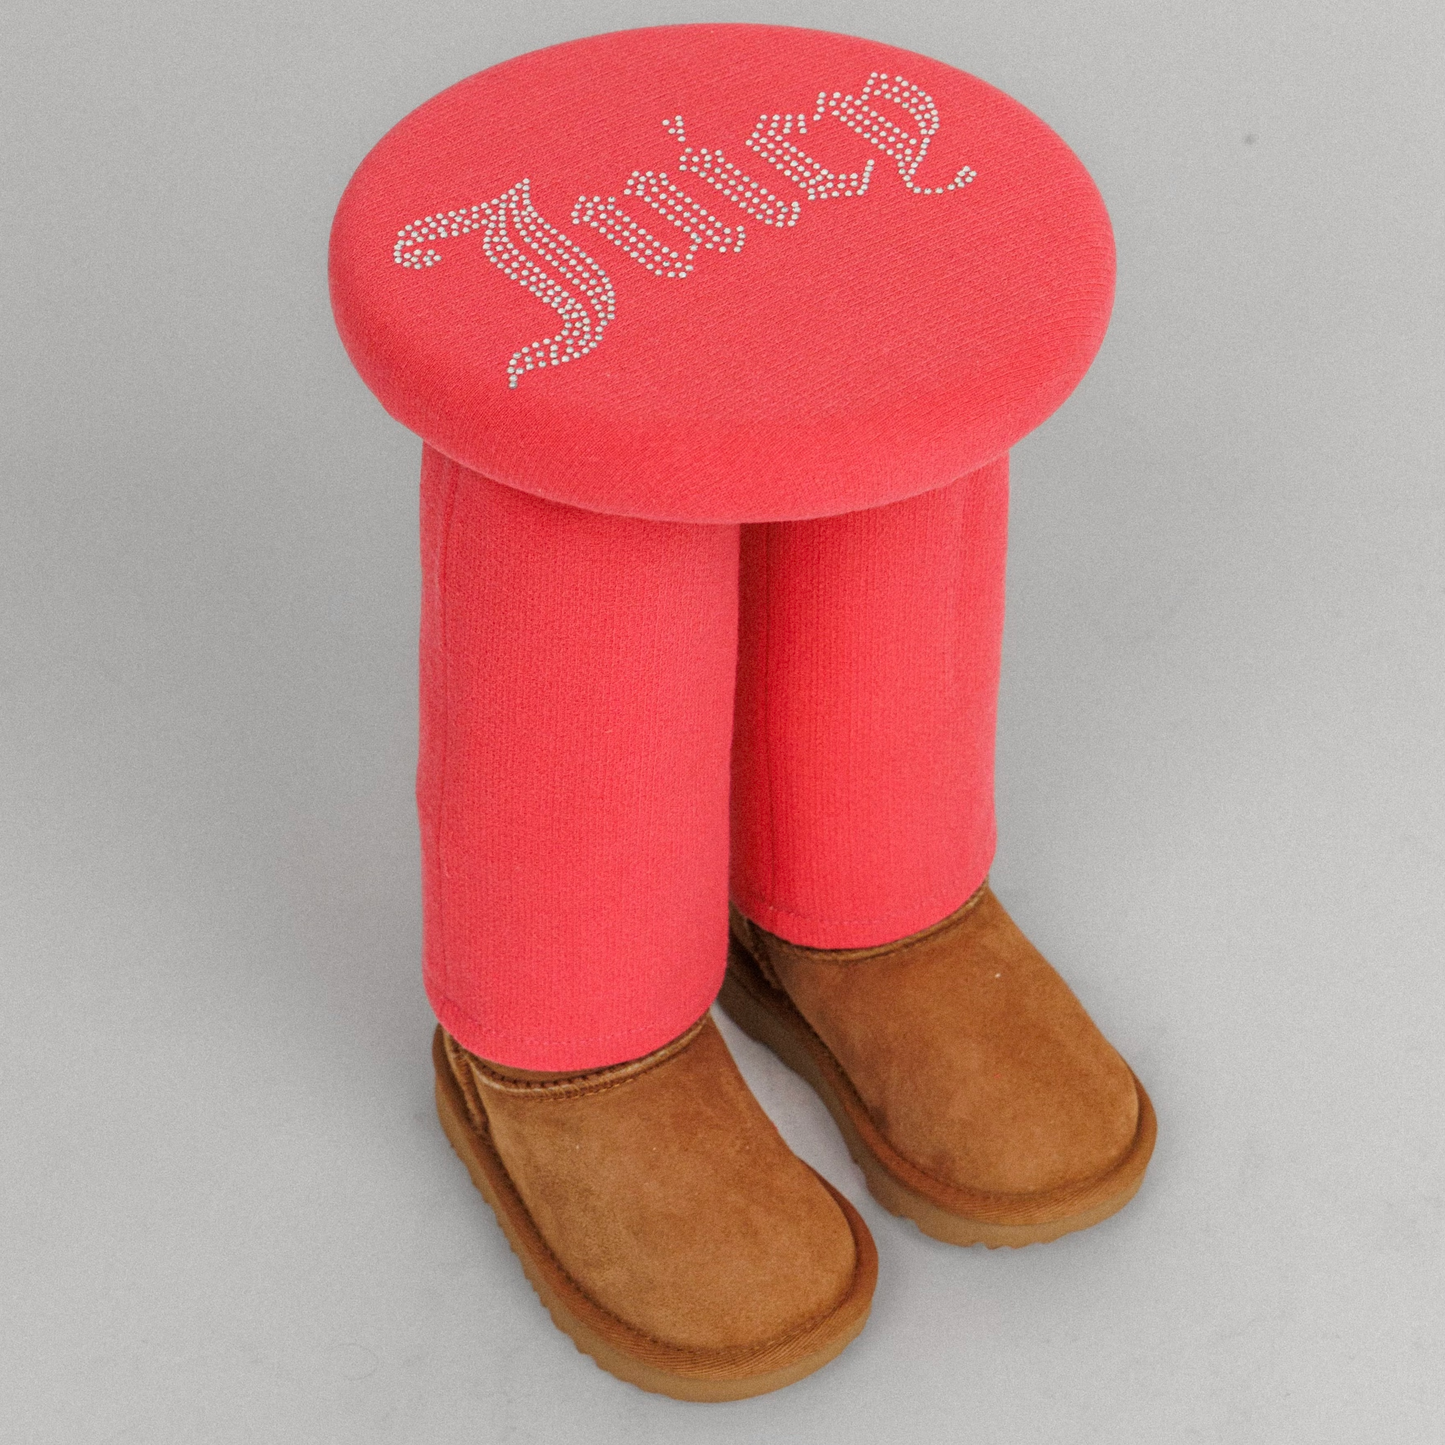 PITTER PATTER JUICY COUTURE MINI TABLE